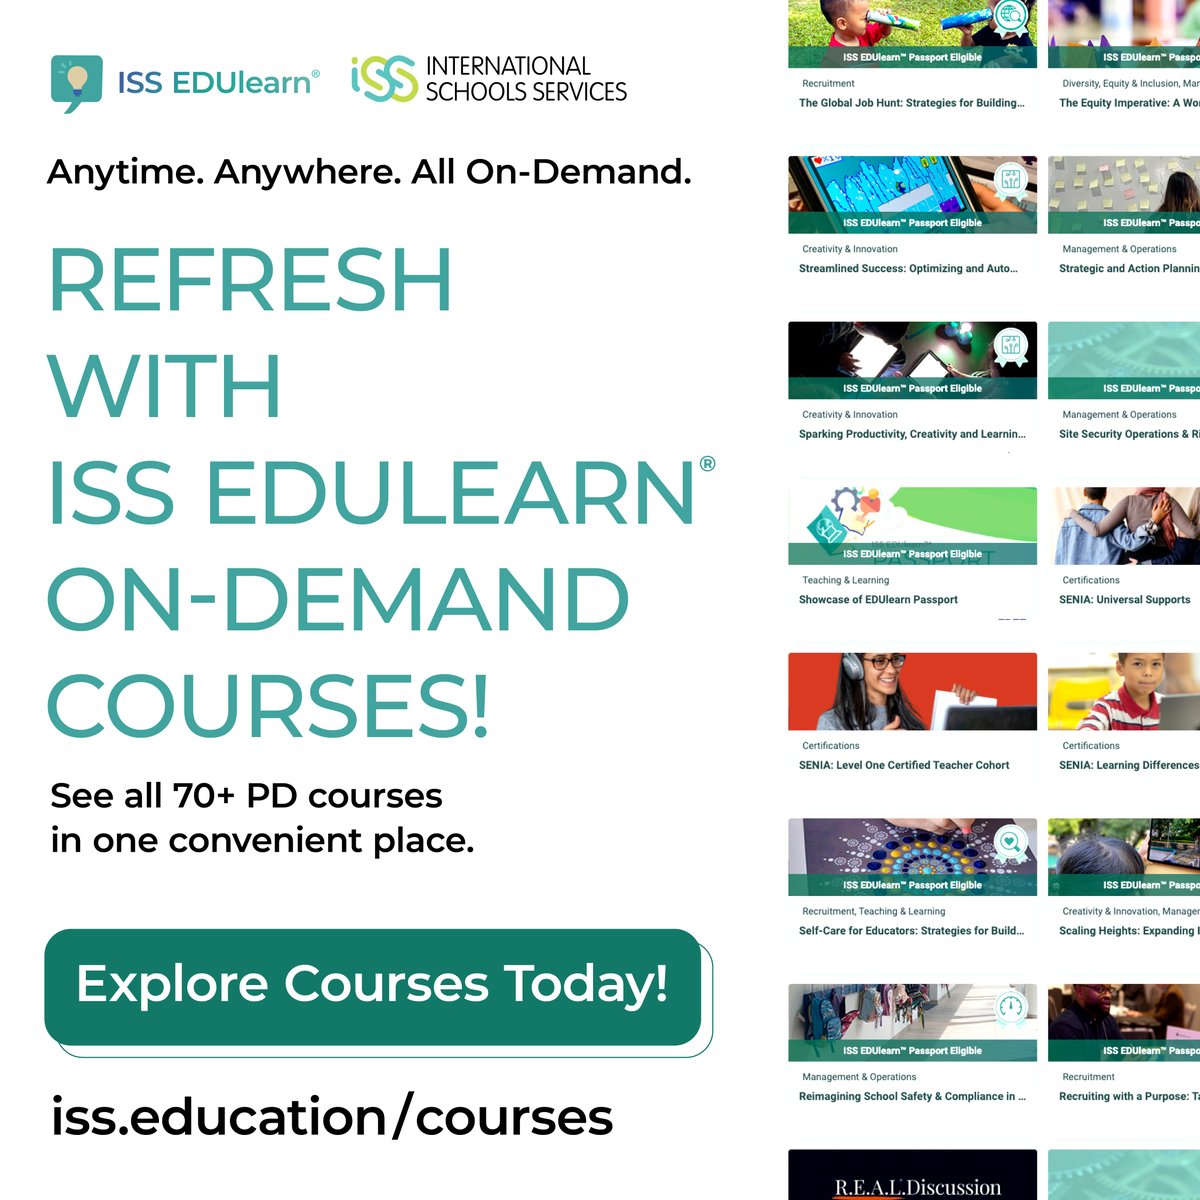 Access 70+ world-class professional development courses — anytime, anywhere, and all on-demand. Explore the ISS EDUlearn® courses today at iss.education/courses! #ISSedu #EdChat #TeacherPD